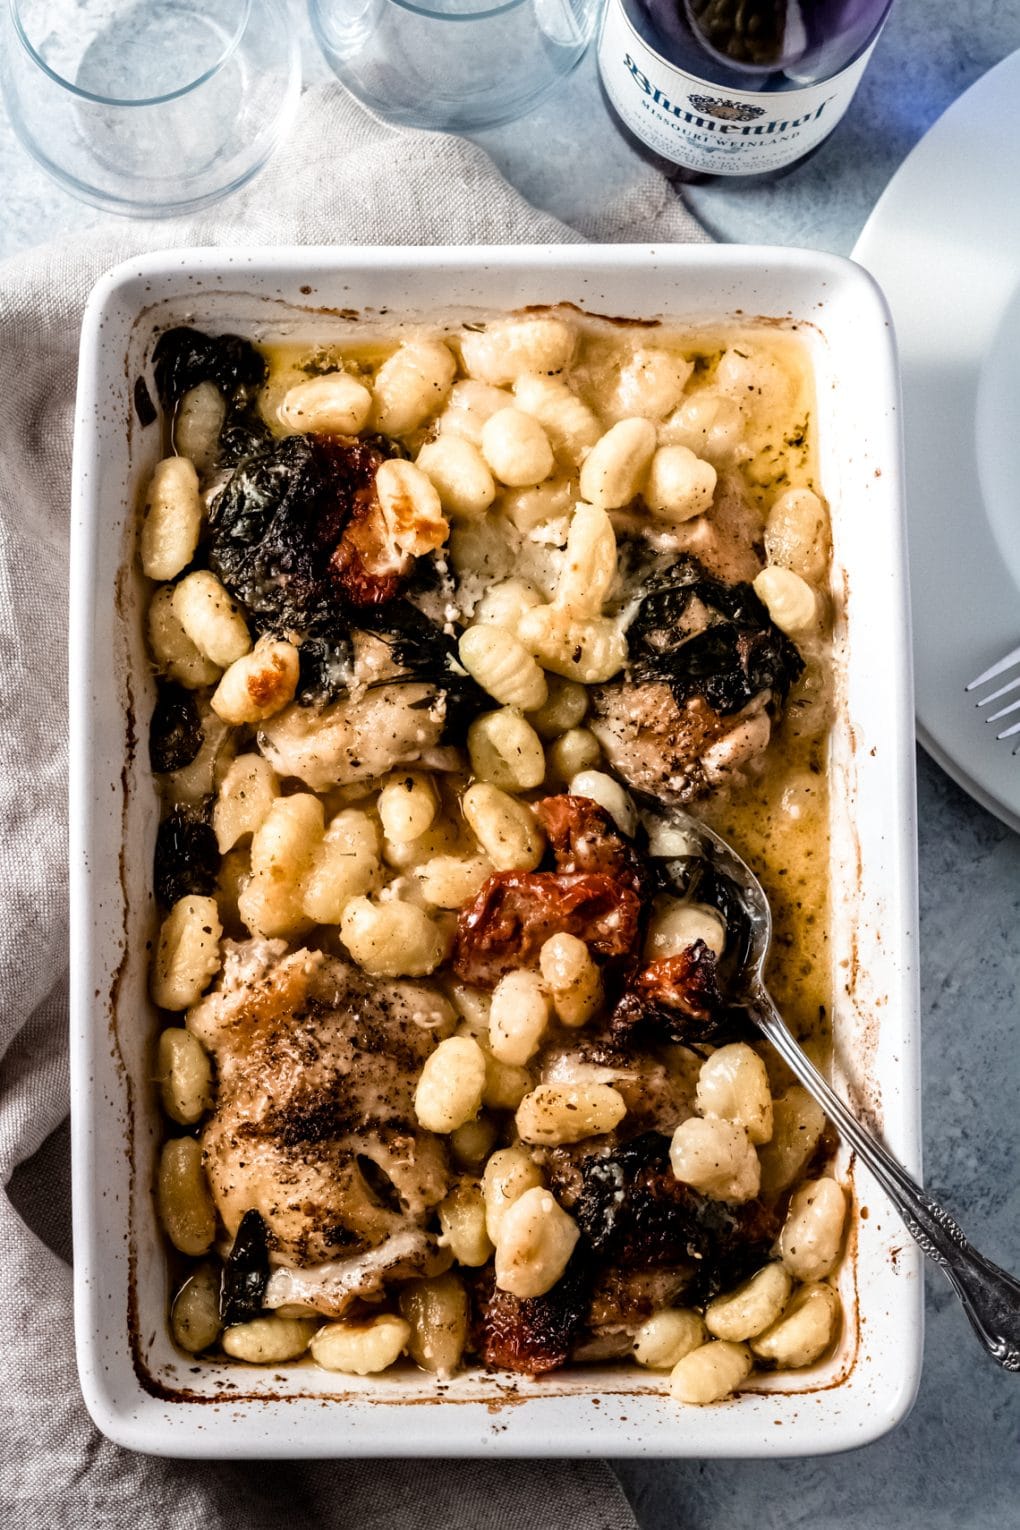 a 9x13 dish of baked chicken gnocchi with a silver serving spoon in the dish. There are plates, two wine glasses and a bottle of wine surrounding the dish.